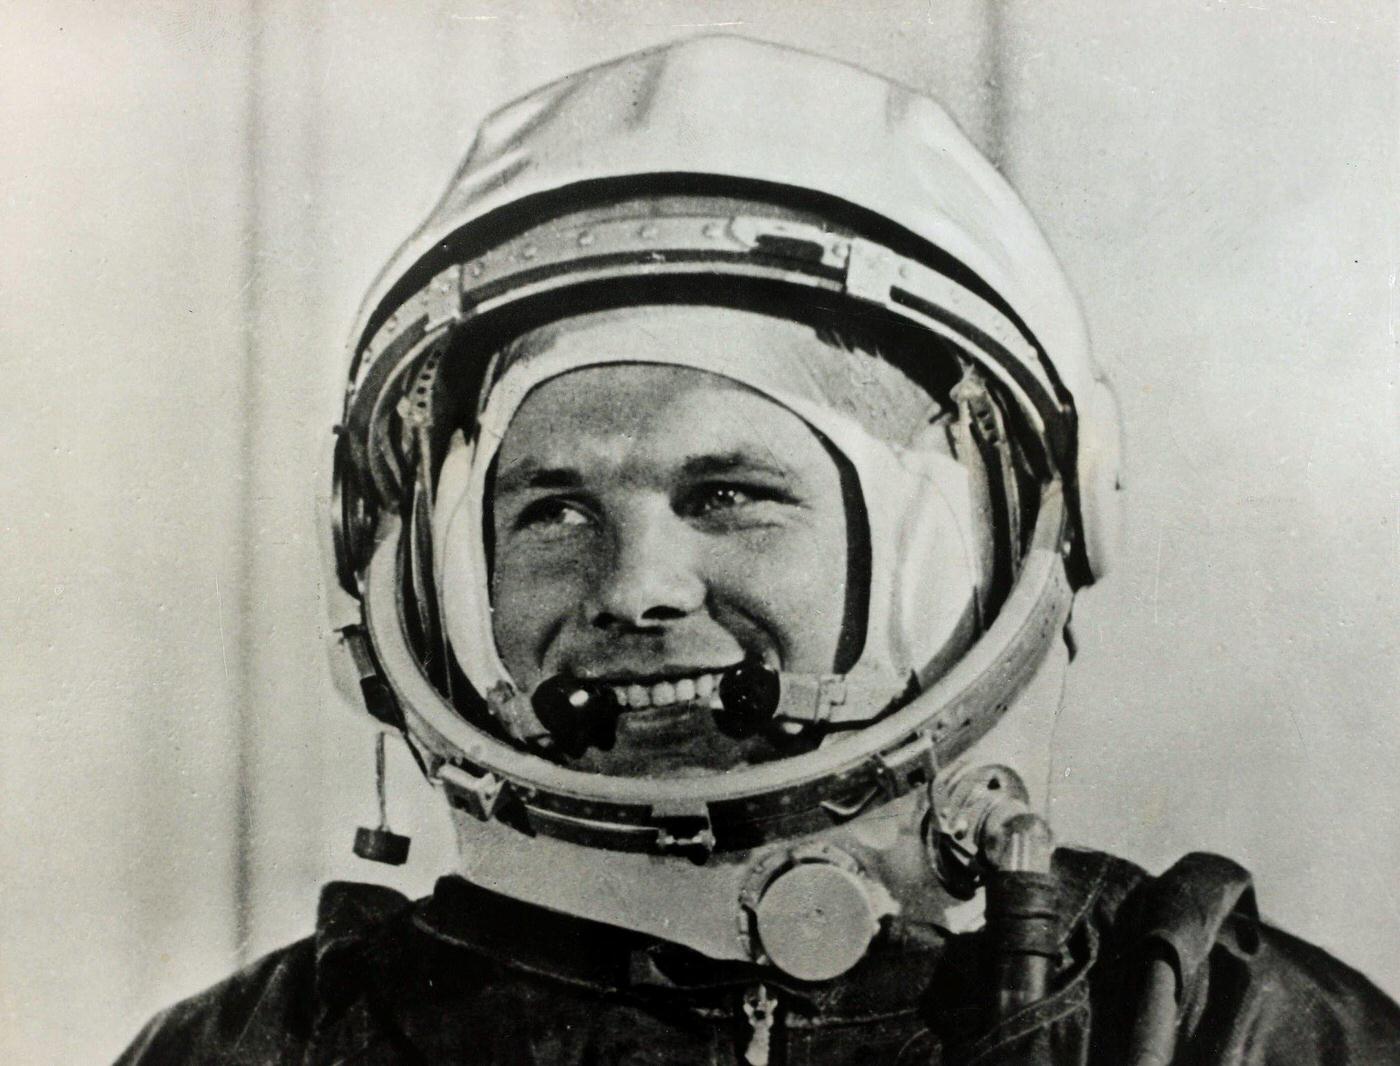 Yuri Gagarin, the first man in space, who completed a circuit of the earth in the spaceship satellite "Vostok" in 1961